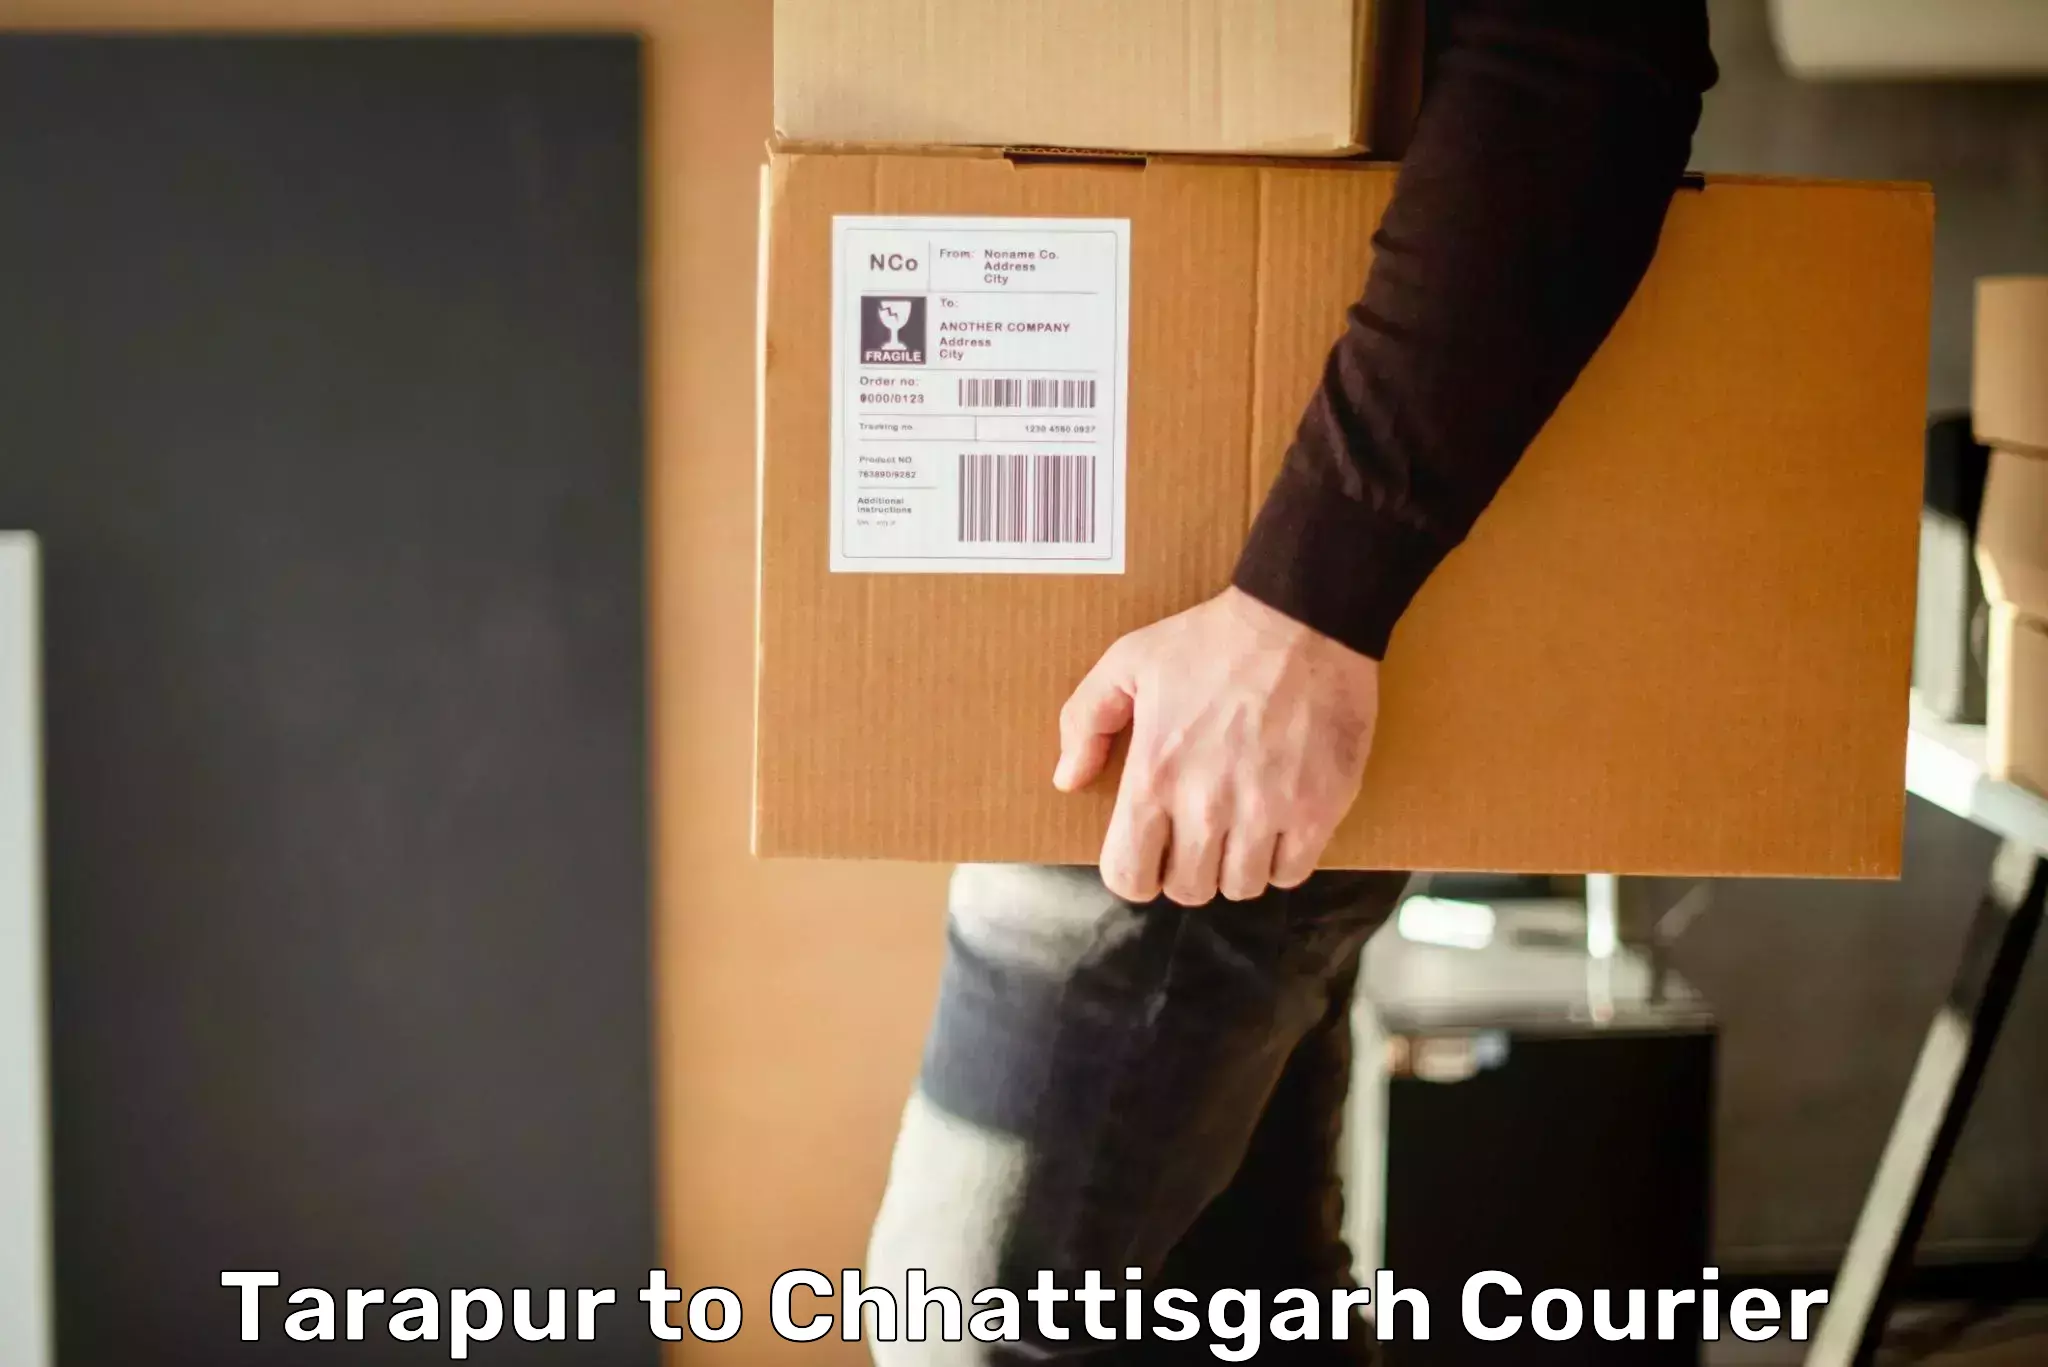 State-of-the-art courier technology Tarapur to Kharsia